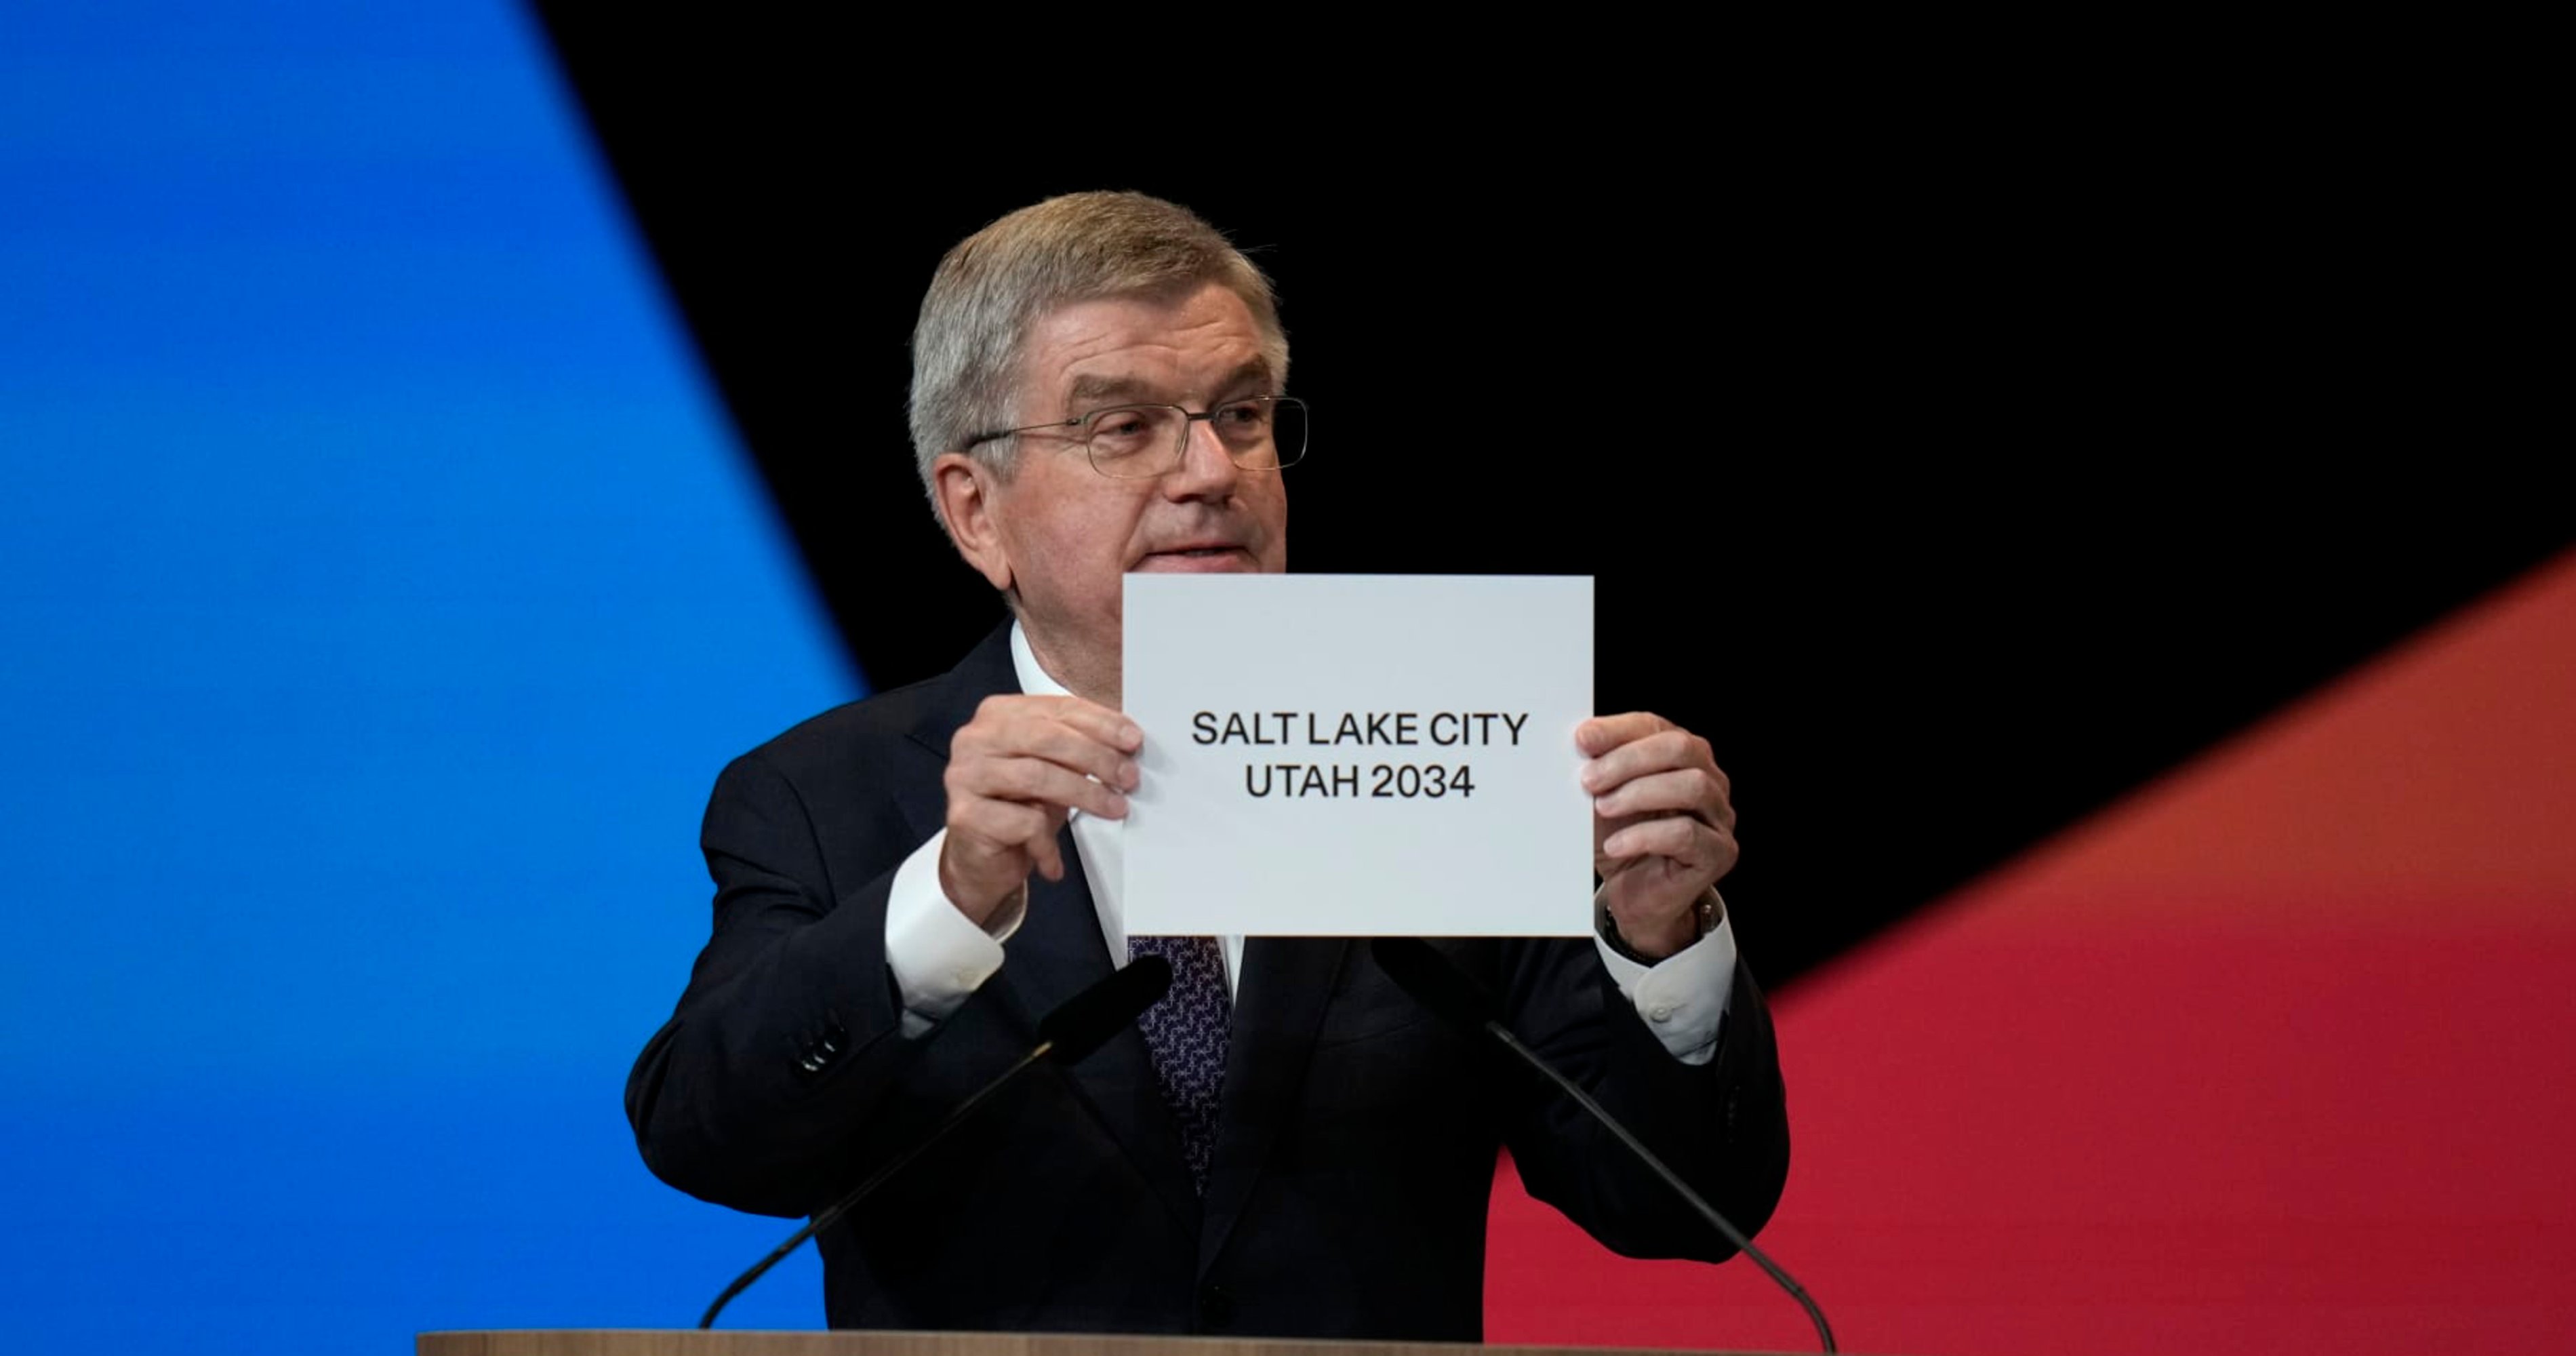 Salt Lake City, Utah to Host 2034 Winter Olympics After French Alps Hosts in 2030